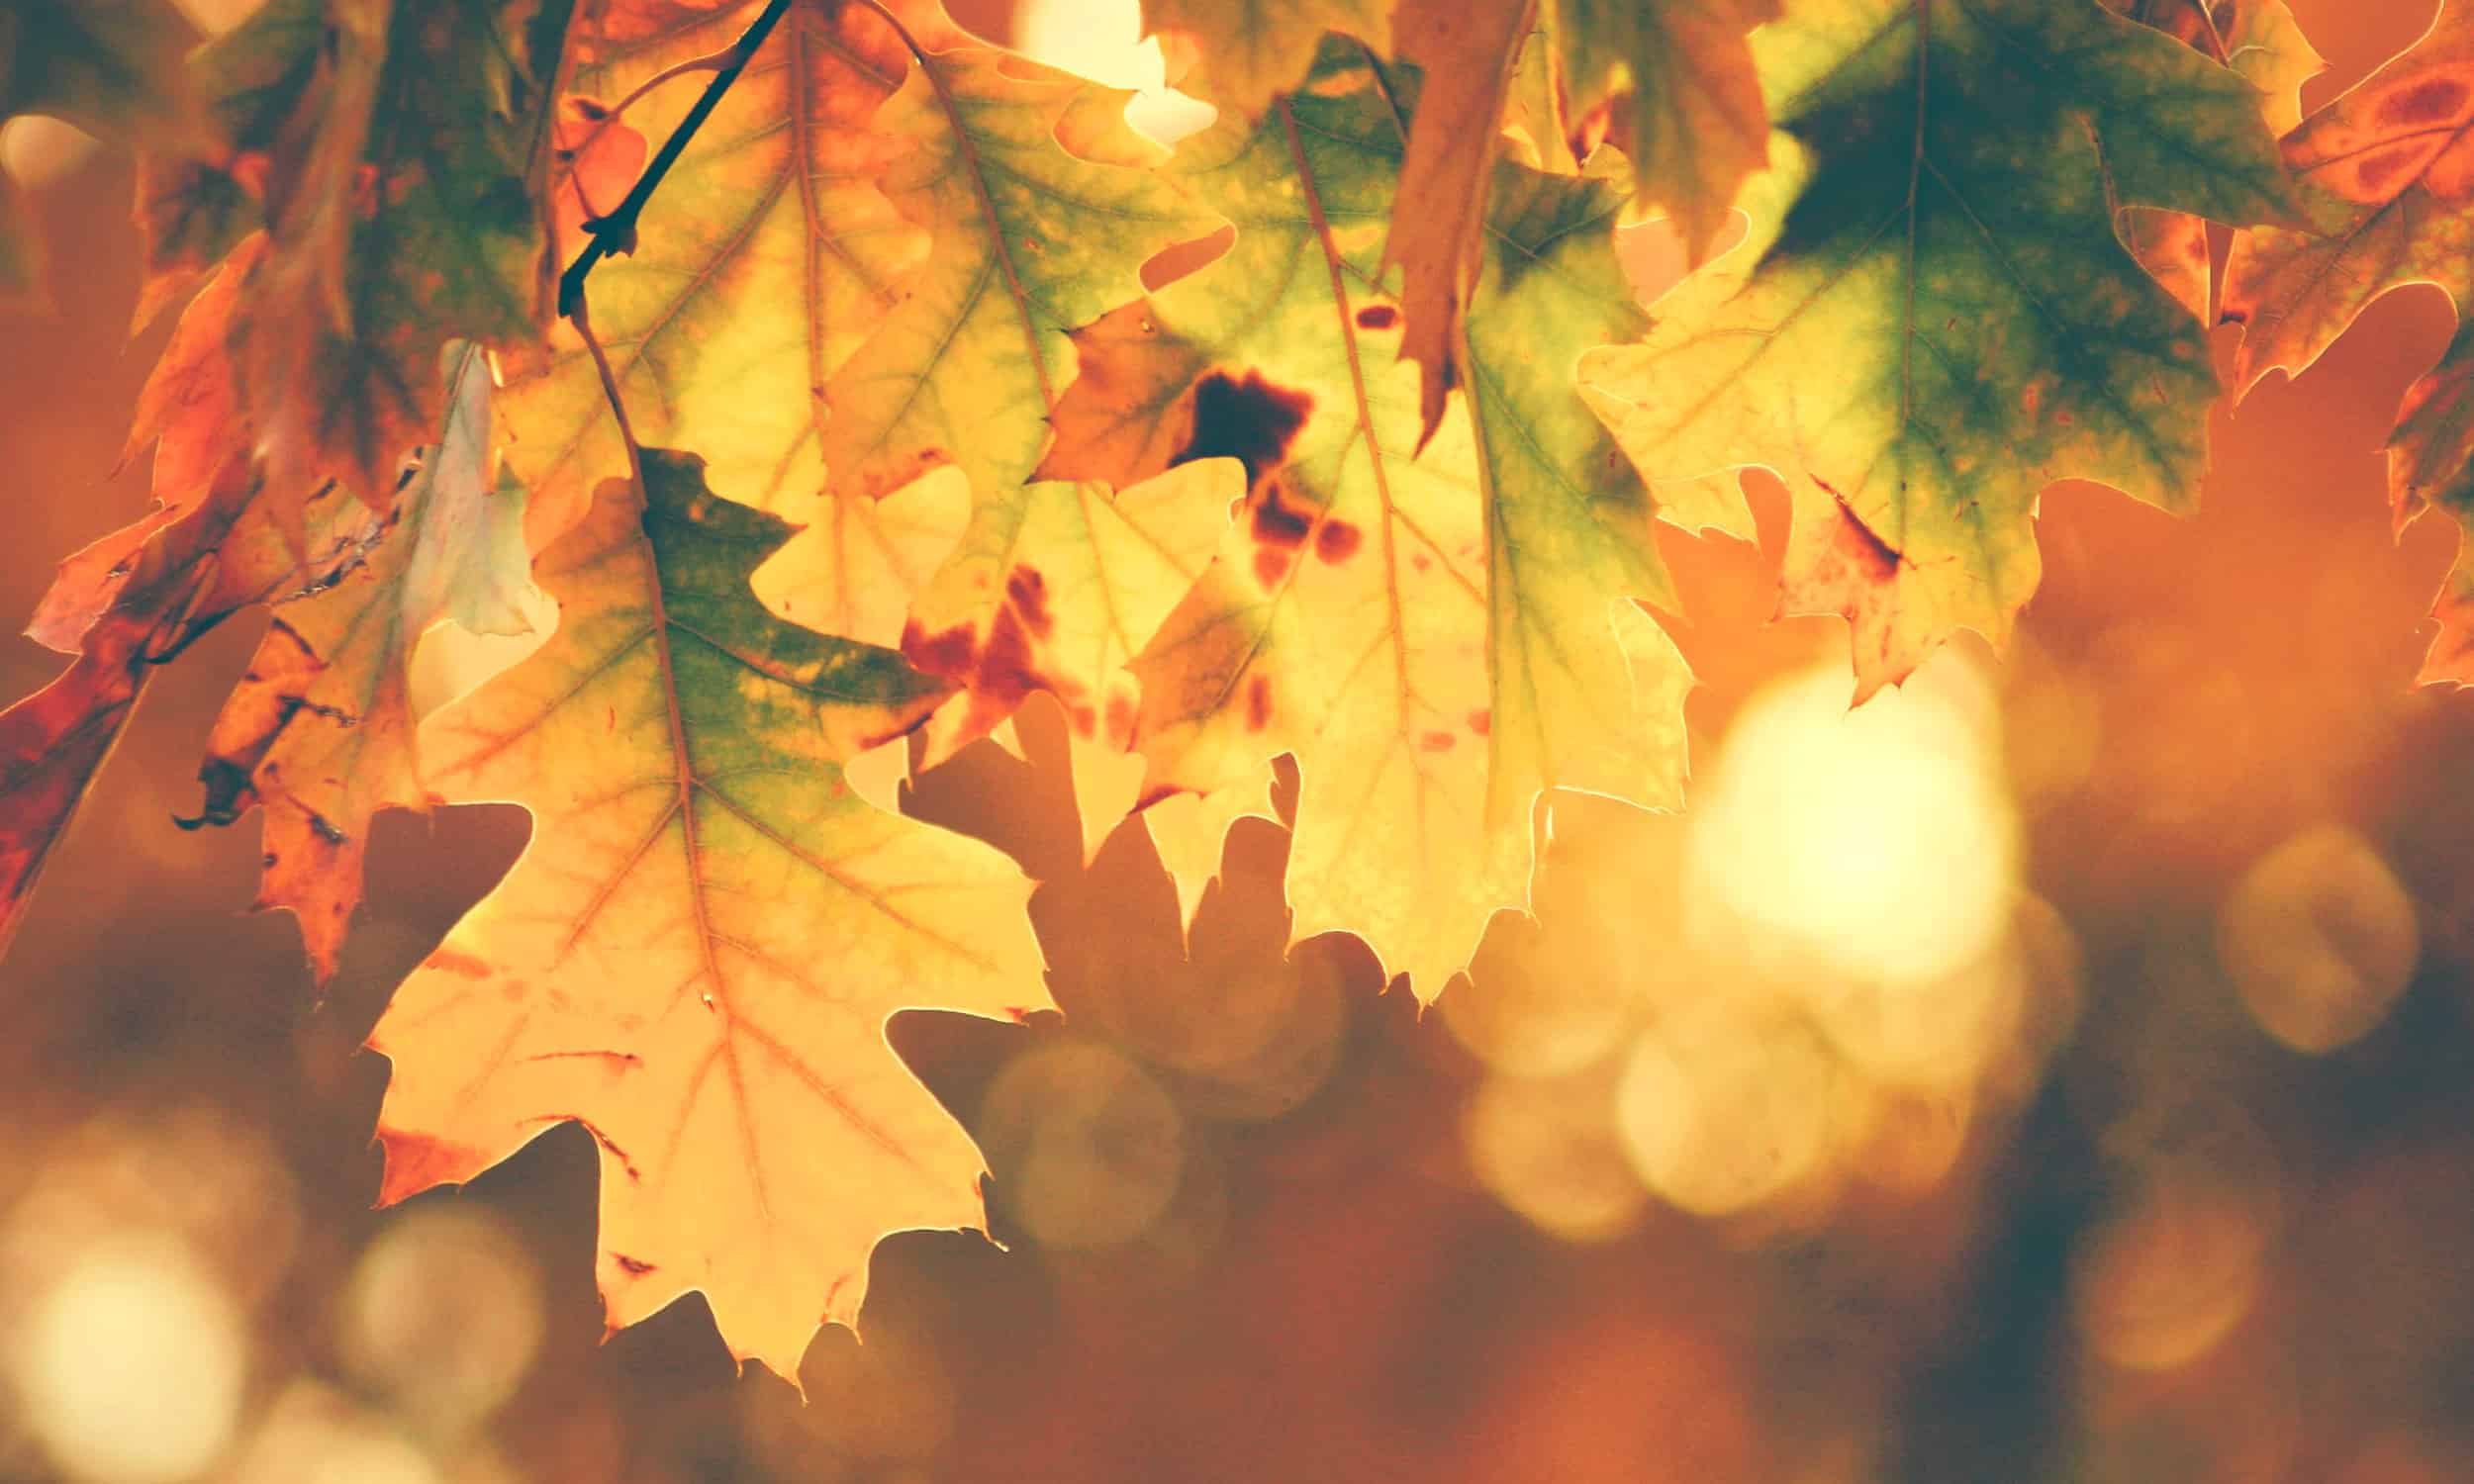 Quotes About Fall | Autumn Quotes